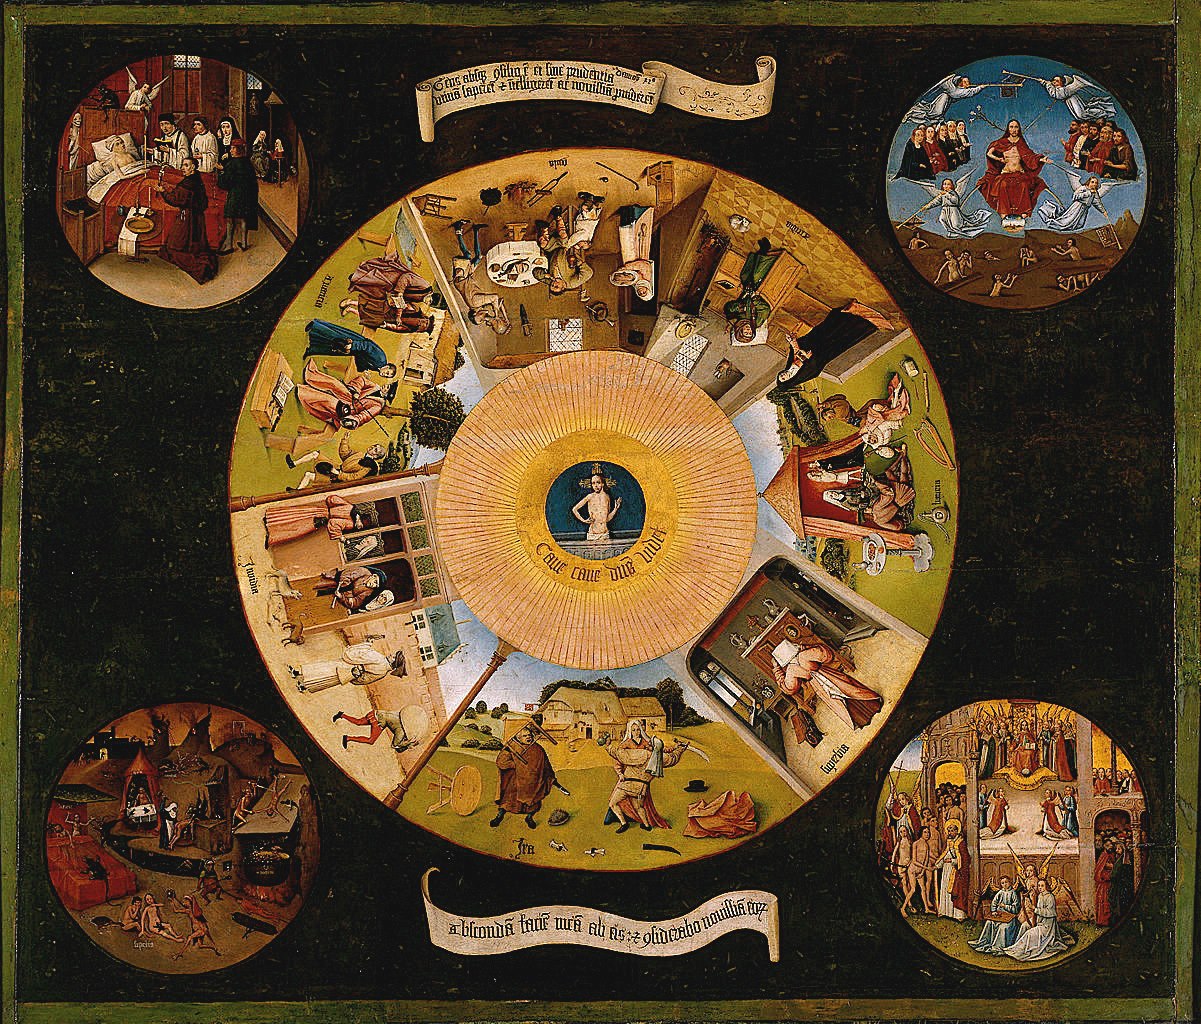 The Seven Deadly Sins and the Four Last Things c. 1500 By Hieronymus Bosch Jheronimus van Aken c. 1450Aug. 9th 1516